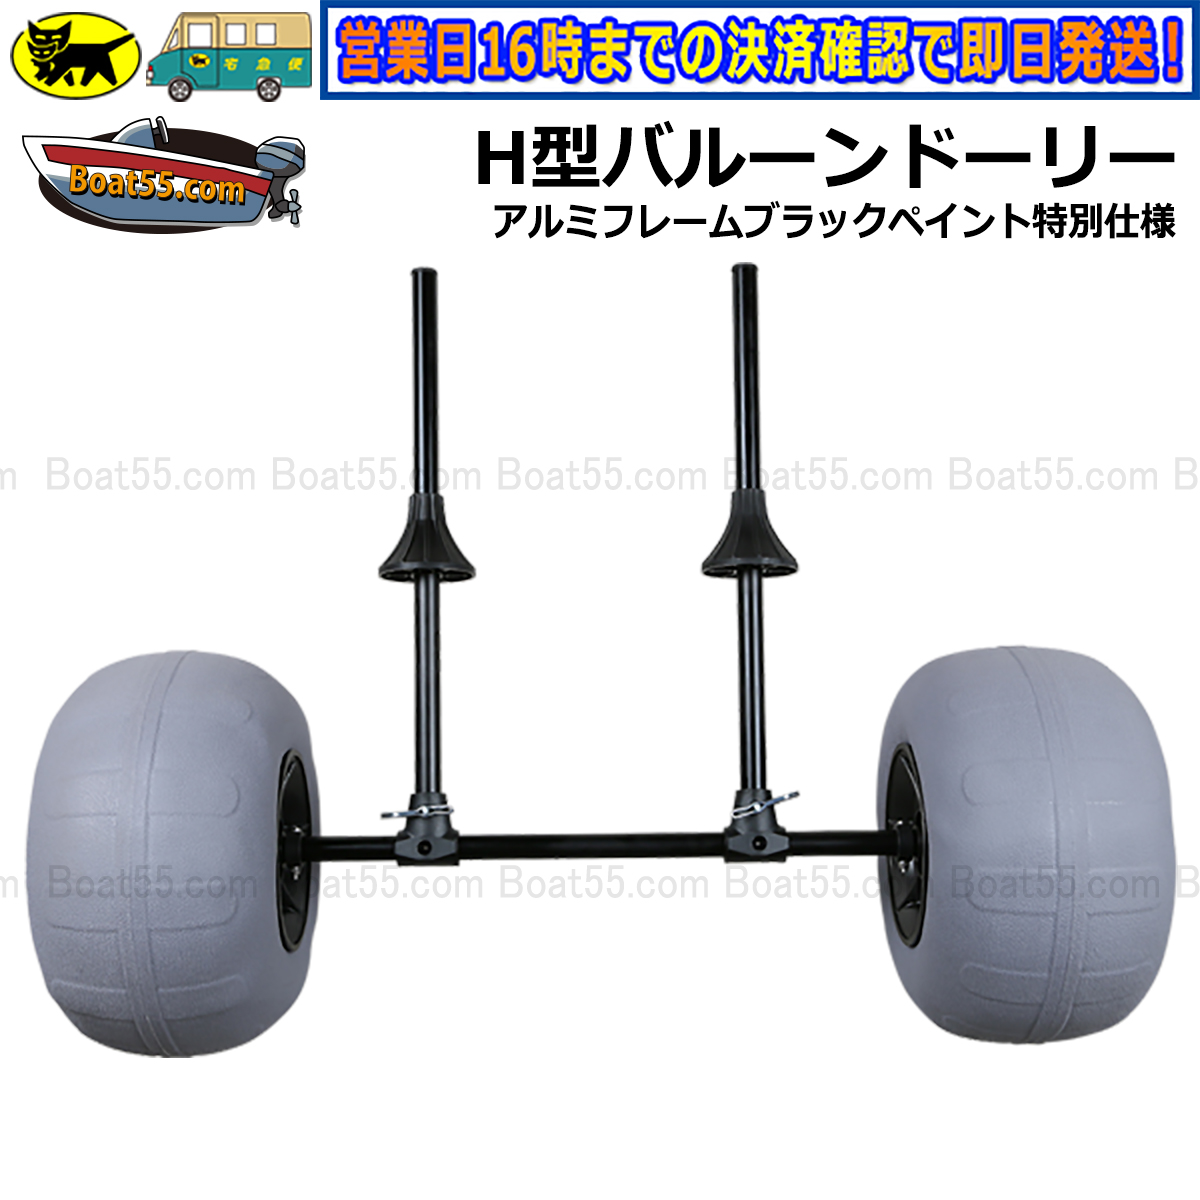 H type ba Rune Dolly aluminium frame : black paint special specification ba Rune tire free shipping ( Okinawa prefecture excepting ) new goods 2 horse power kayak supplies kayak boat 